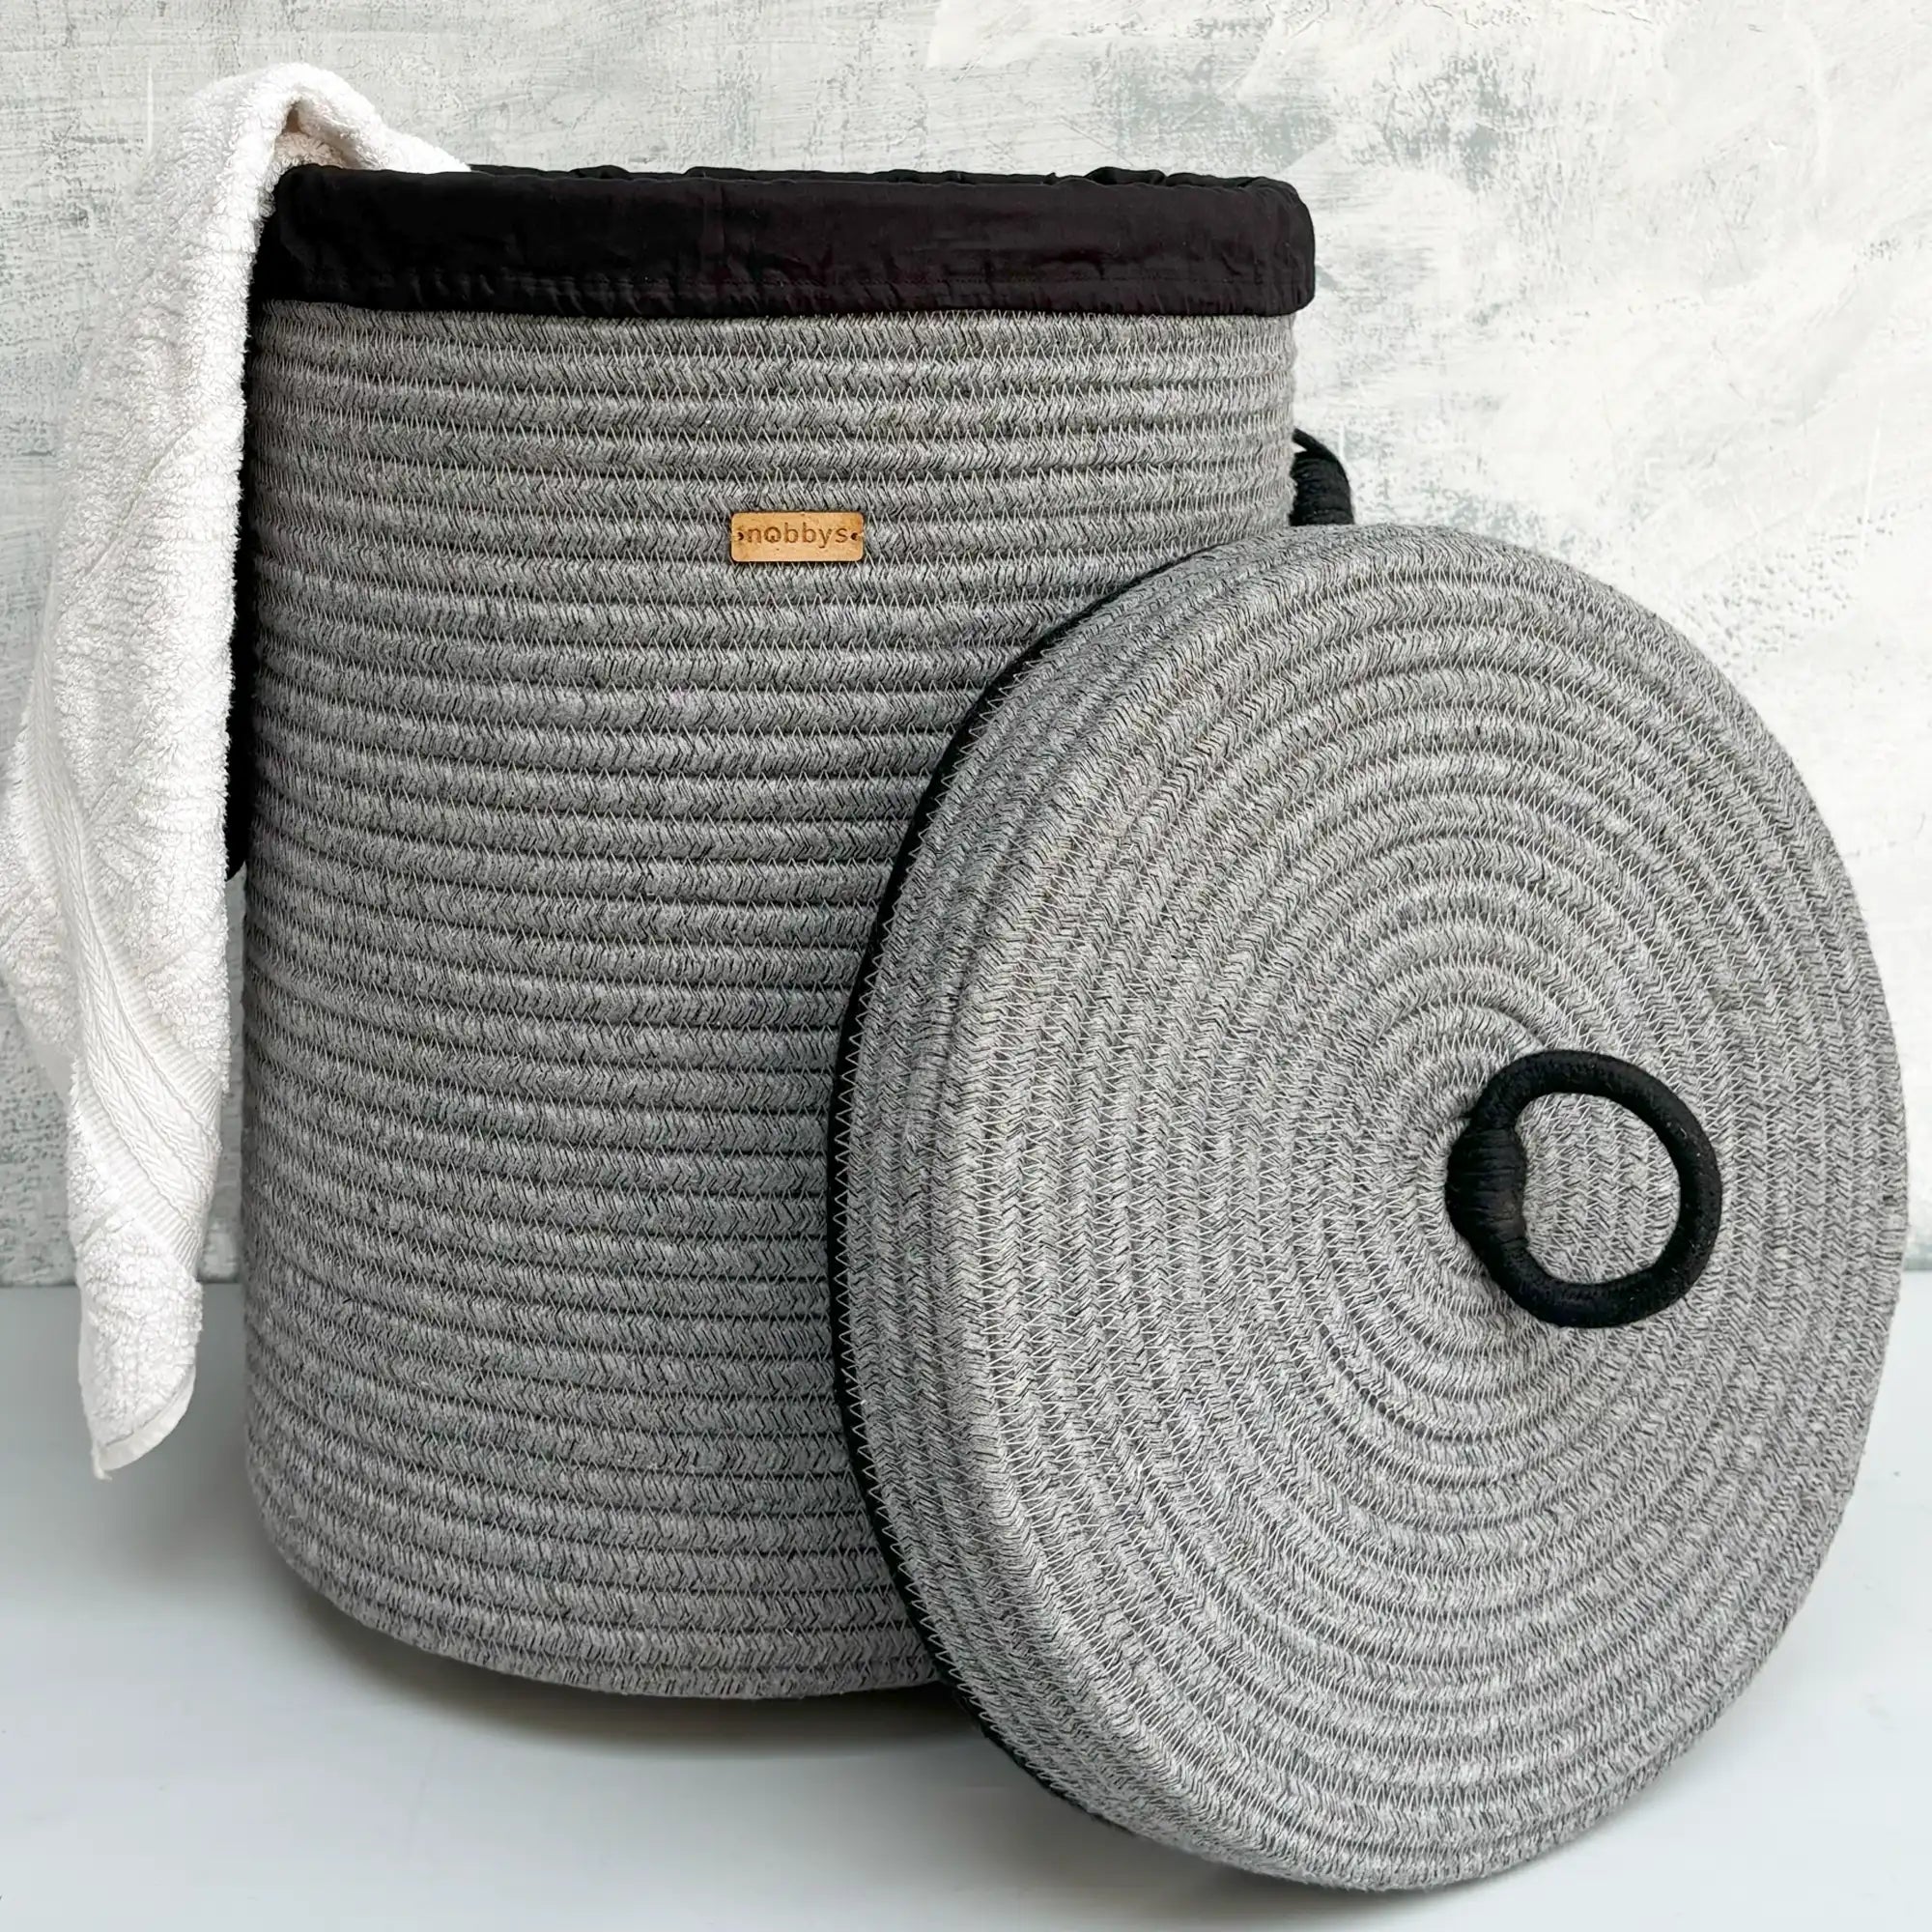 Laundry Basket with Lid